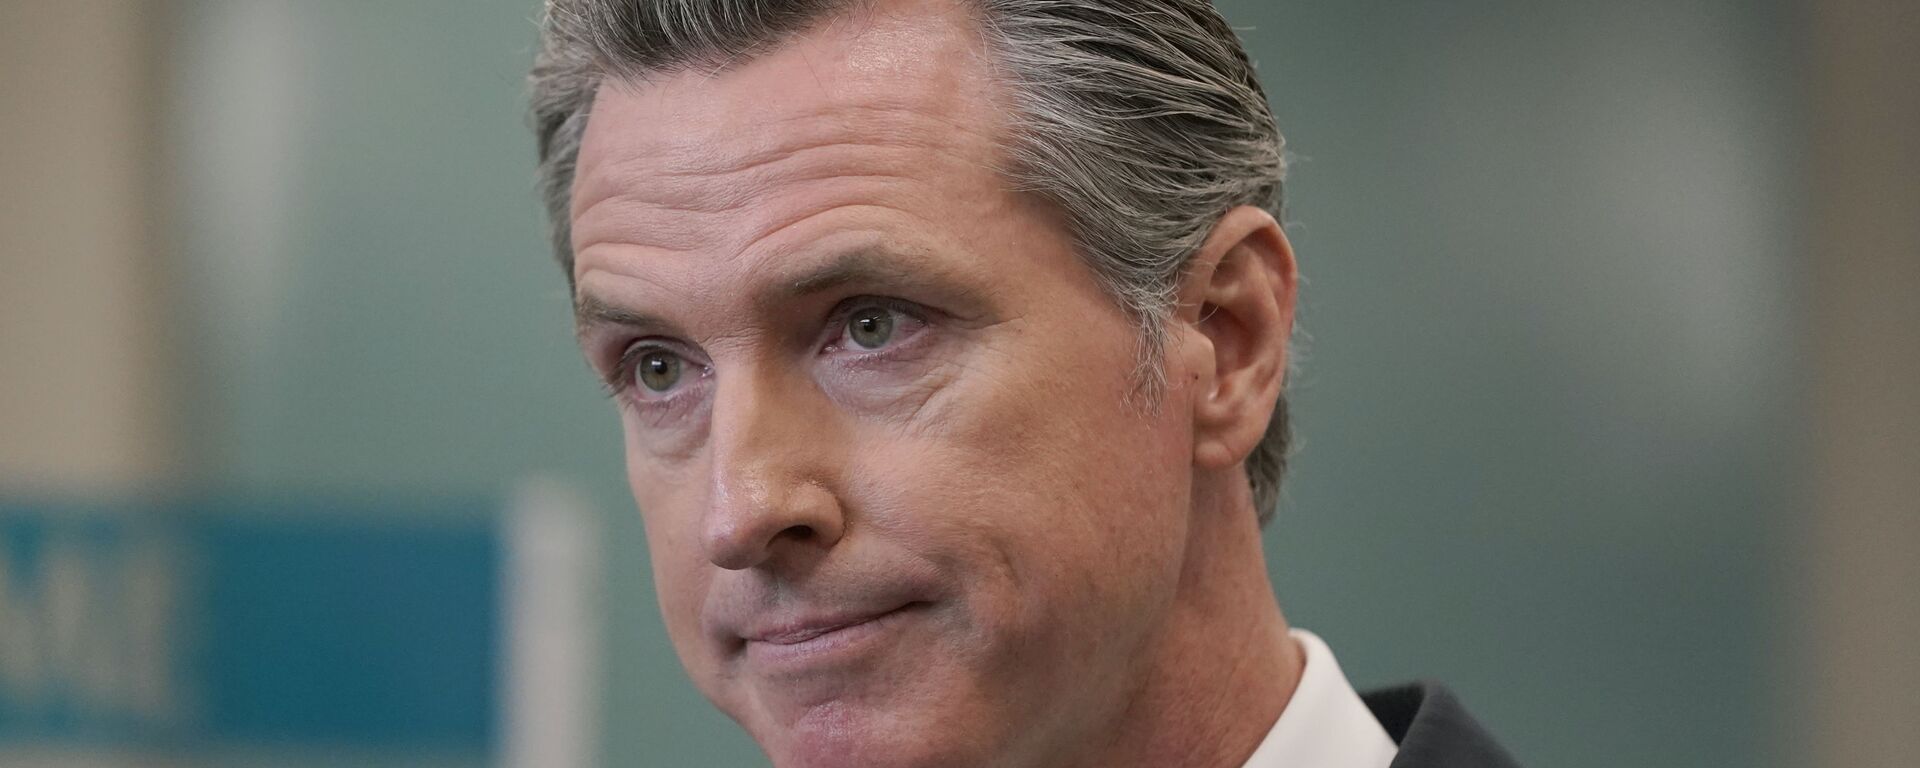 FILE — In this July 26, 2021, file photo, Gov. Gavin Newsom appears at a news conference in Oakland, Calif. Supporters of the effort to recall Newsom are asking a court to prohibit him from calling the effort sRepublican recall in the state's official voter guide. The lawsuit was filed by July 30, 2021, by Orrin Heatlie, the Republican activist who launched the recall effort. - Sputnik International, 1920, 09.09.2021